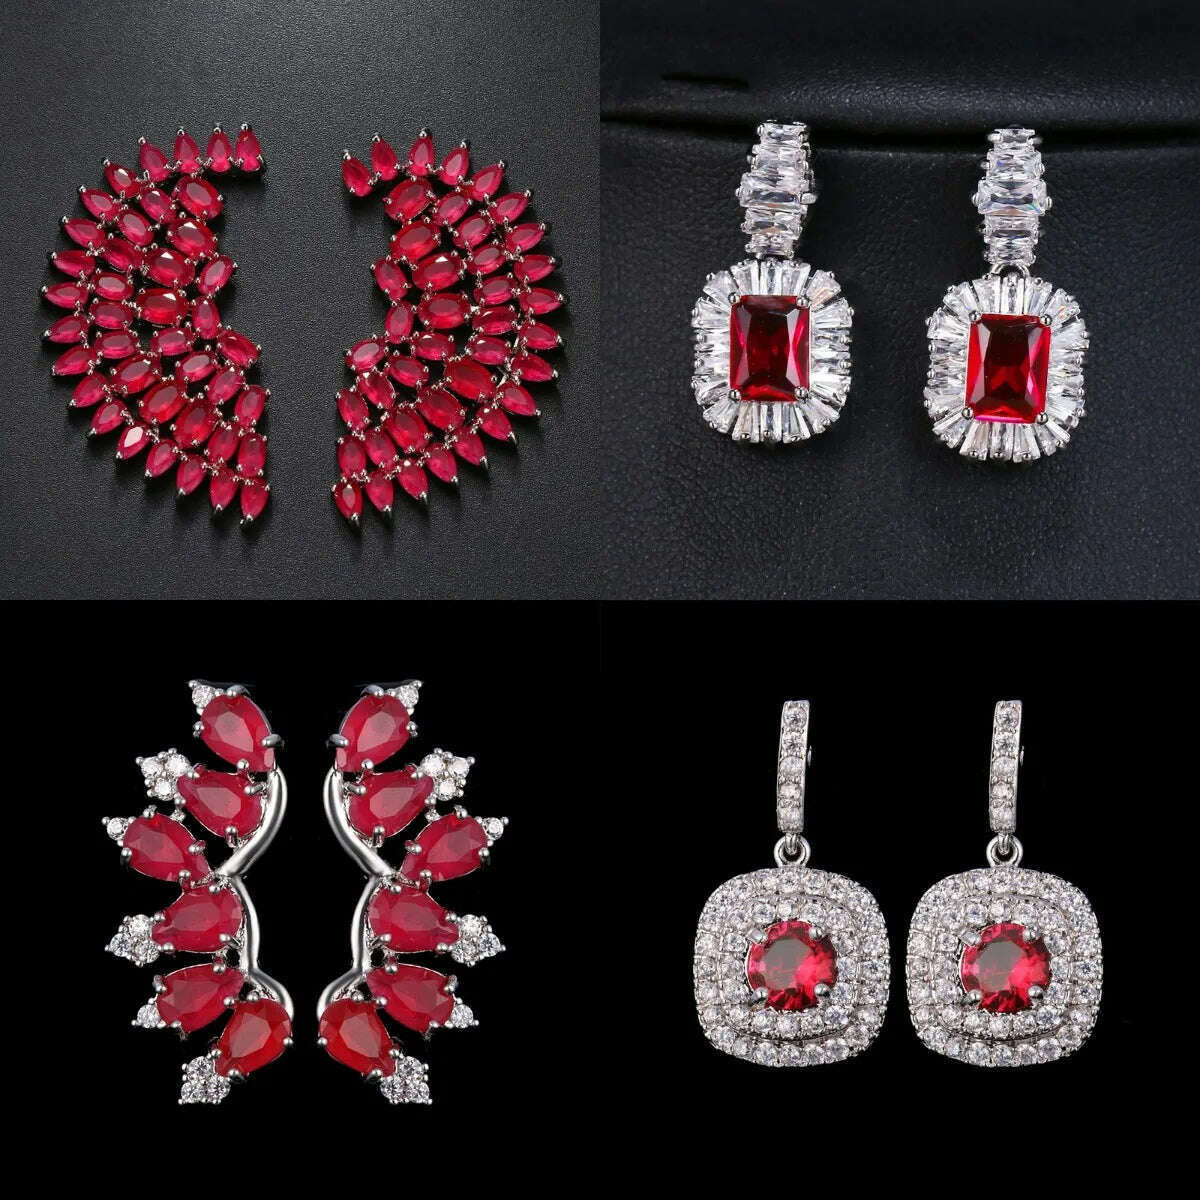 KIMLUD, JMK Fashion Red Stone Cubic Zircon Dangle Earrings For Women Bridal Wedding Ruby Gemstone Jewelry Crystal Party Accessories Gift, KIMLUD Women's Clothes